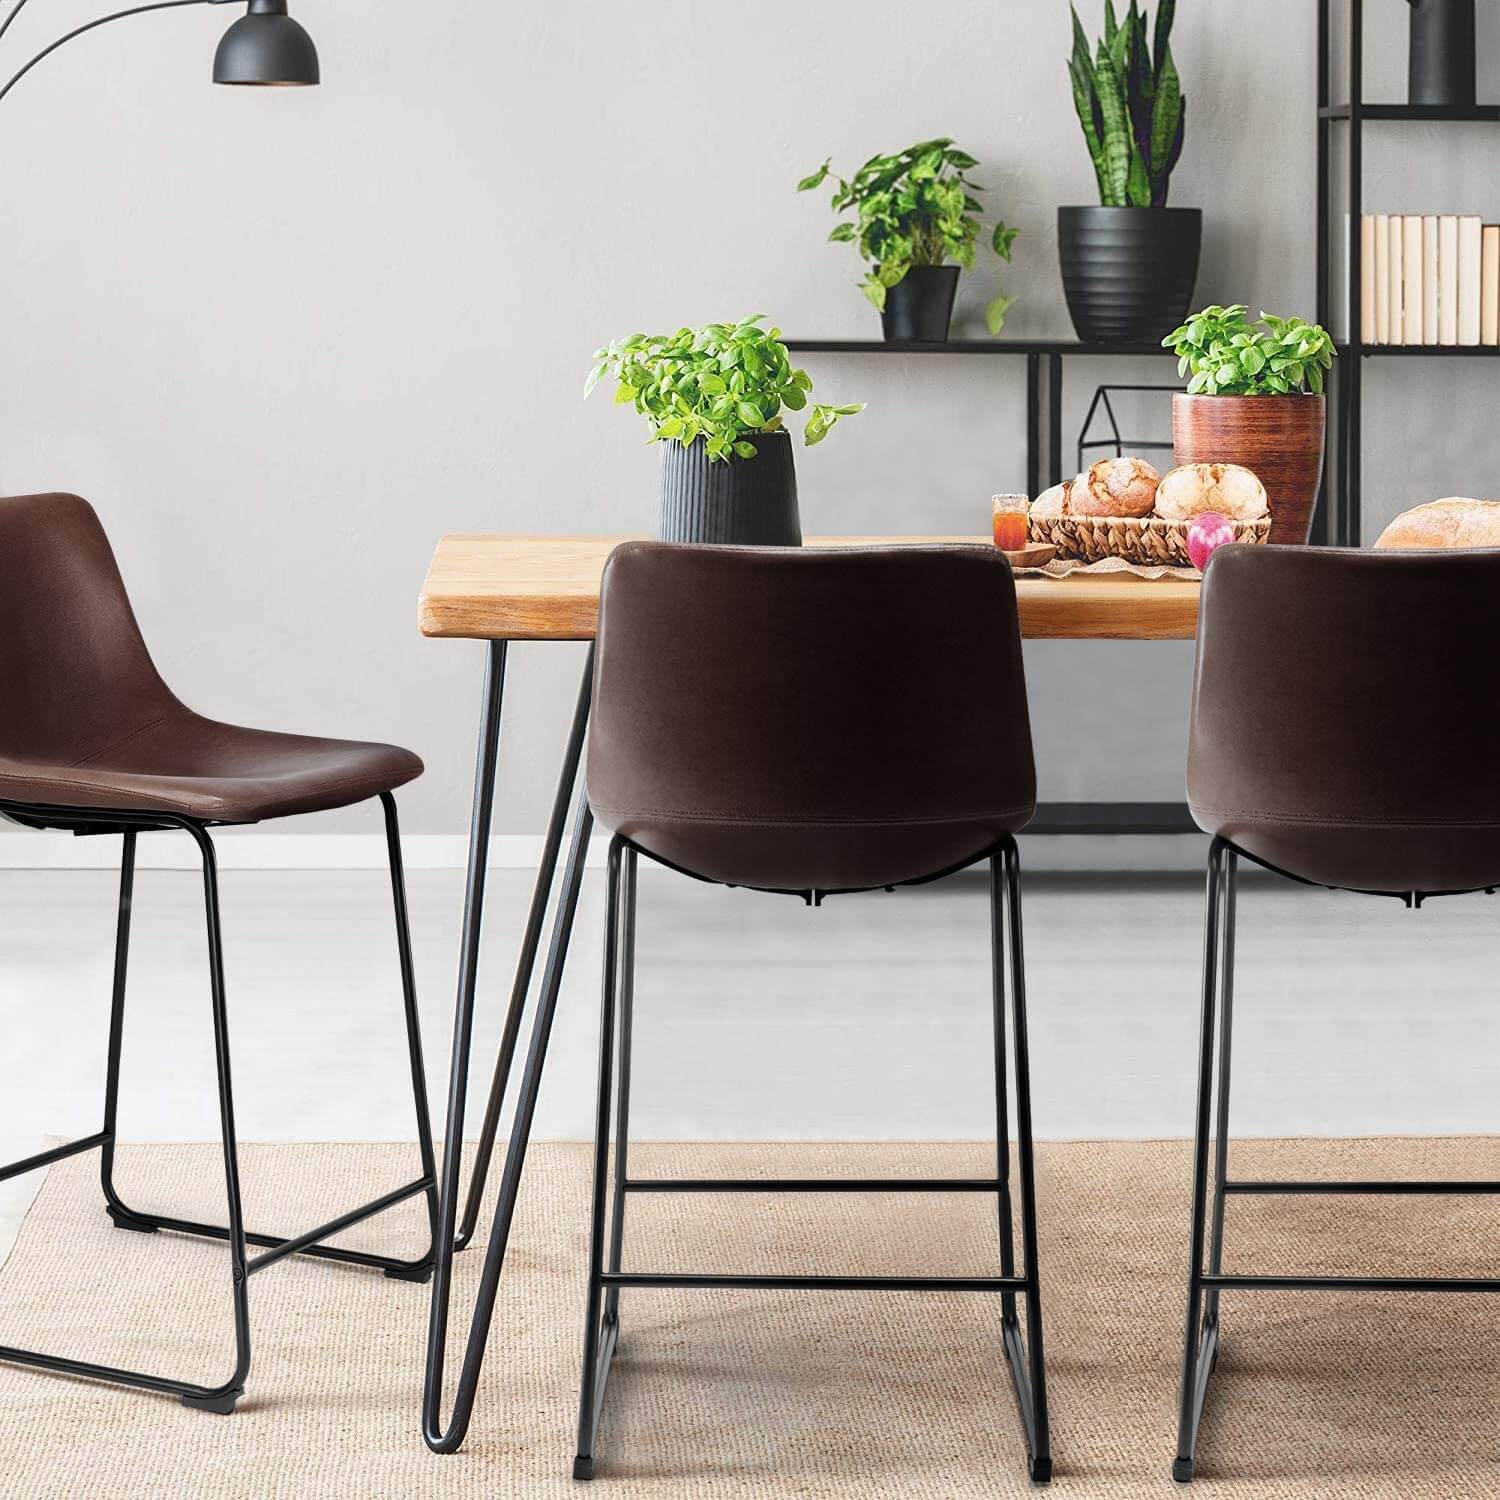 Exactly how to Pick the Right Stool Height